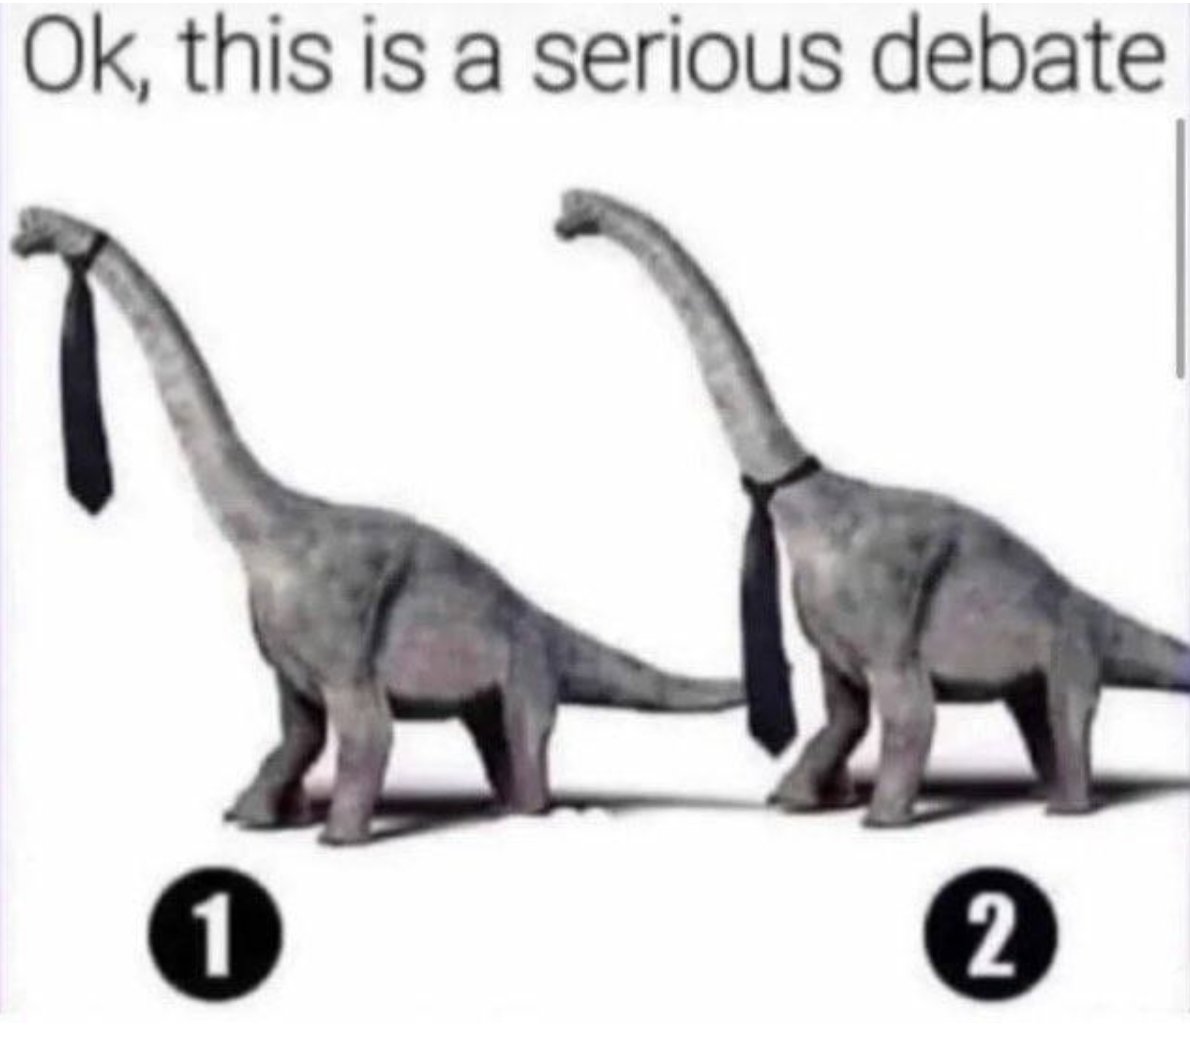 ok this is a serious debate - Ok, this is a serious debate 1 2